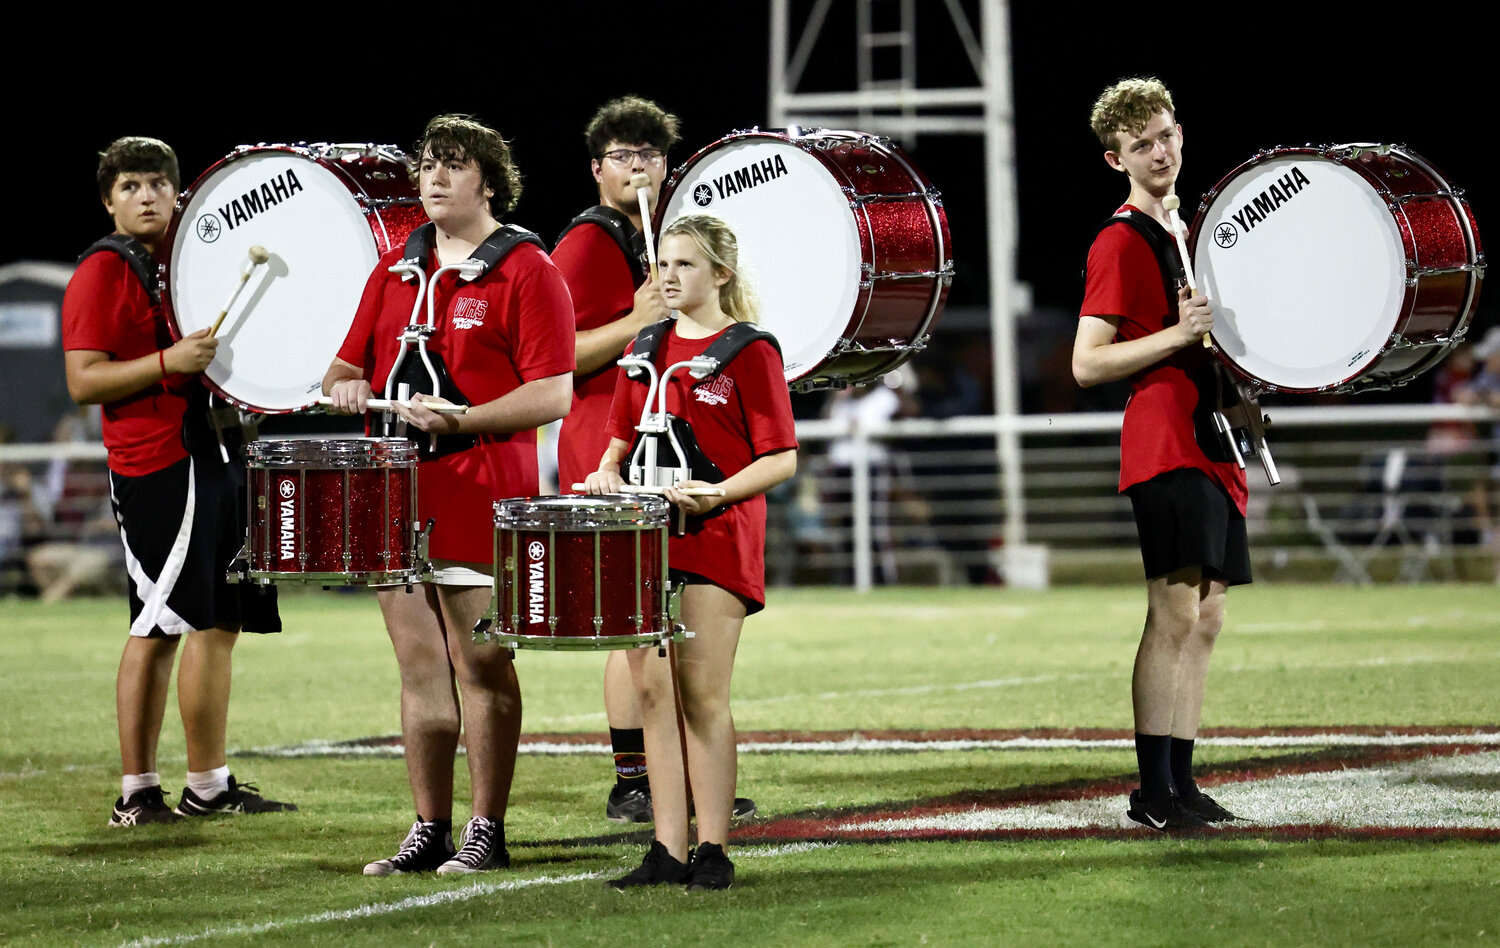 The Washington drumline readies for their performance during halftime of the Warrior football game against Jones Friday night.